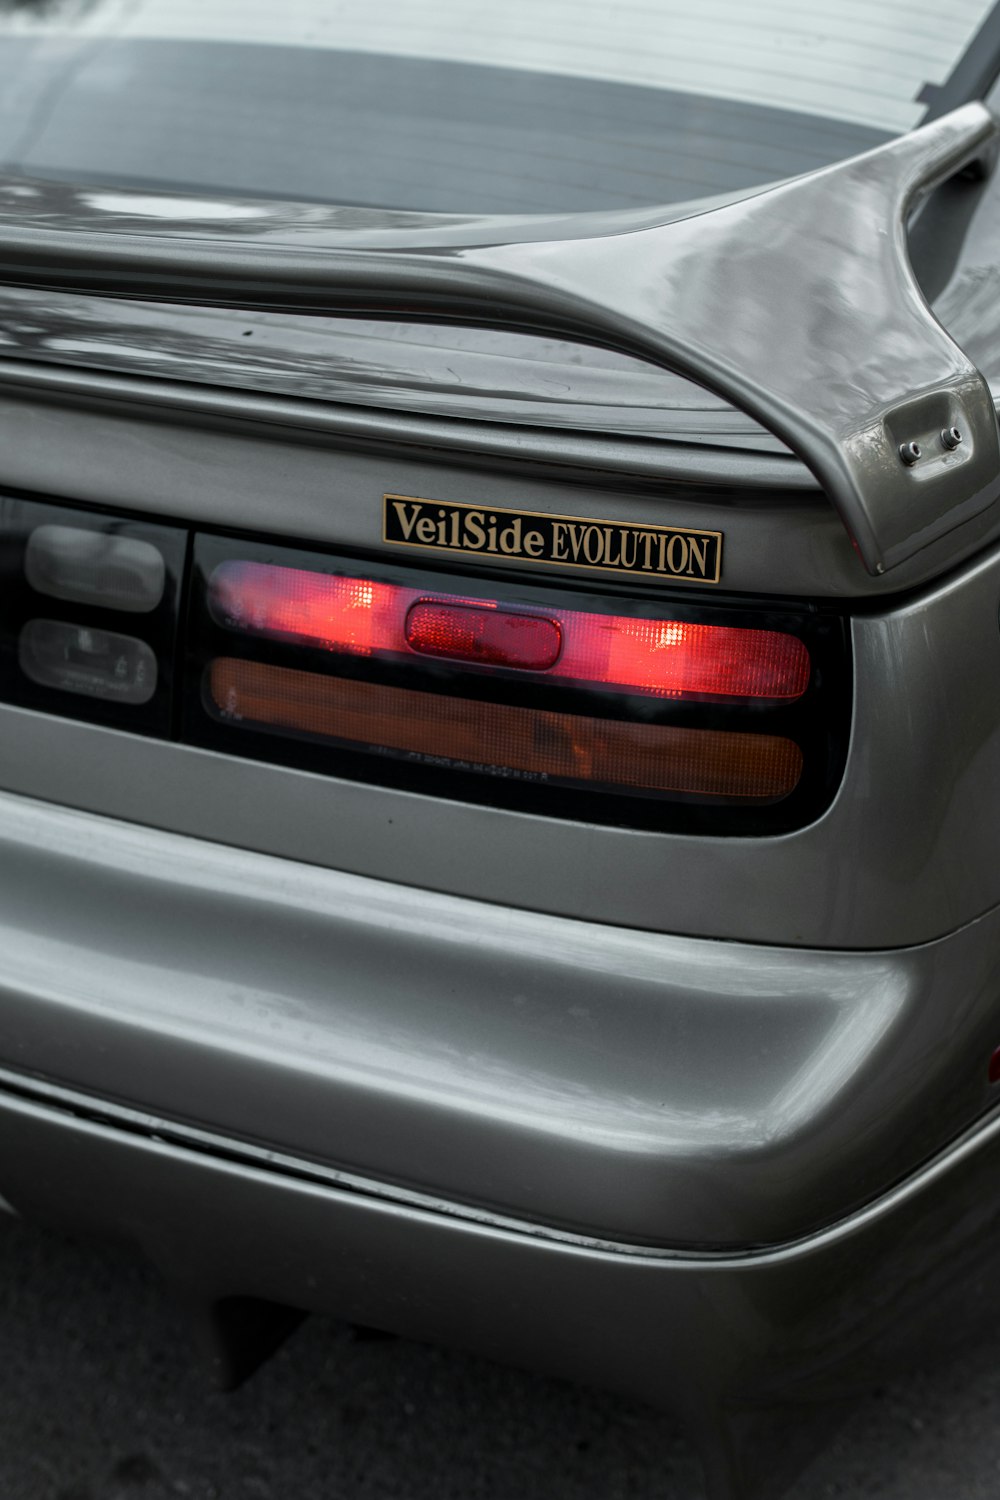 the back end of a silver car with a yellow sticker on it